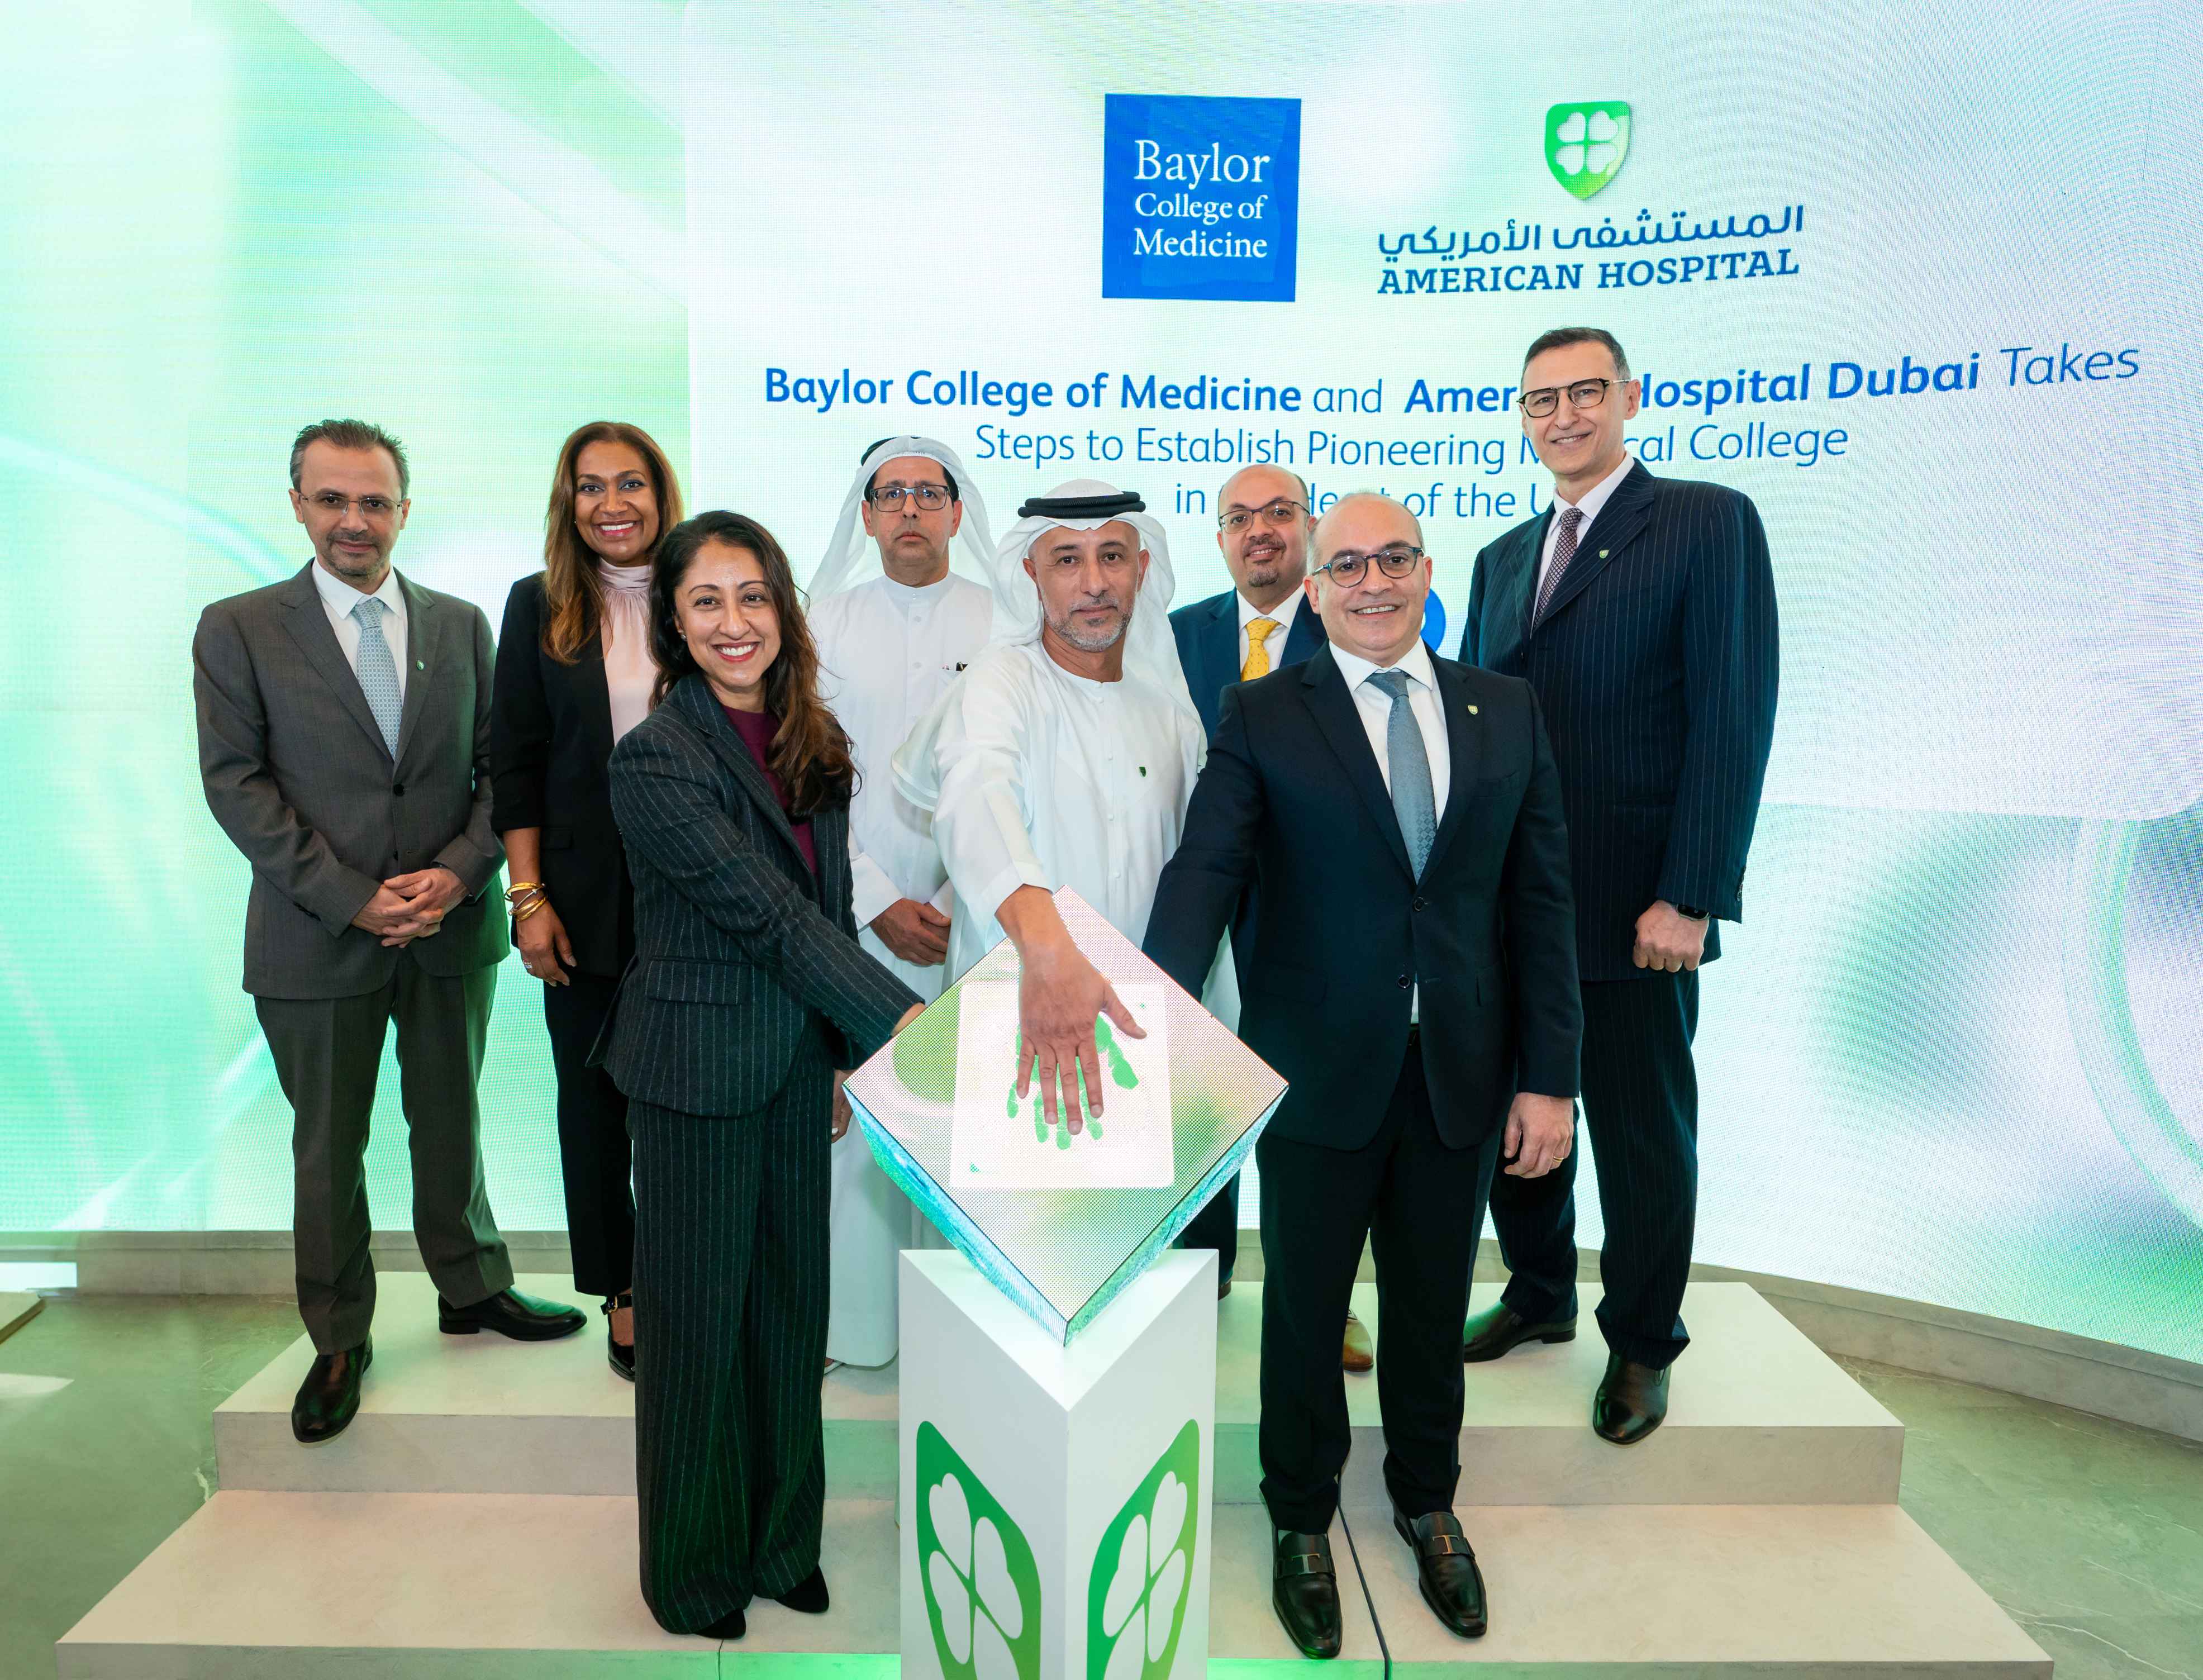 Baylor College of Medicine and American Hospital Dubai Take Steps to Establish Pioneering Medical College in the Heart of the UAE